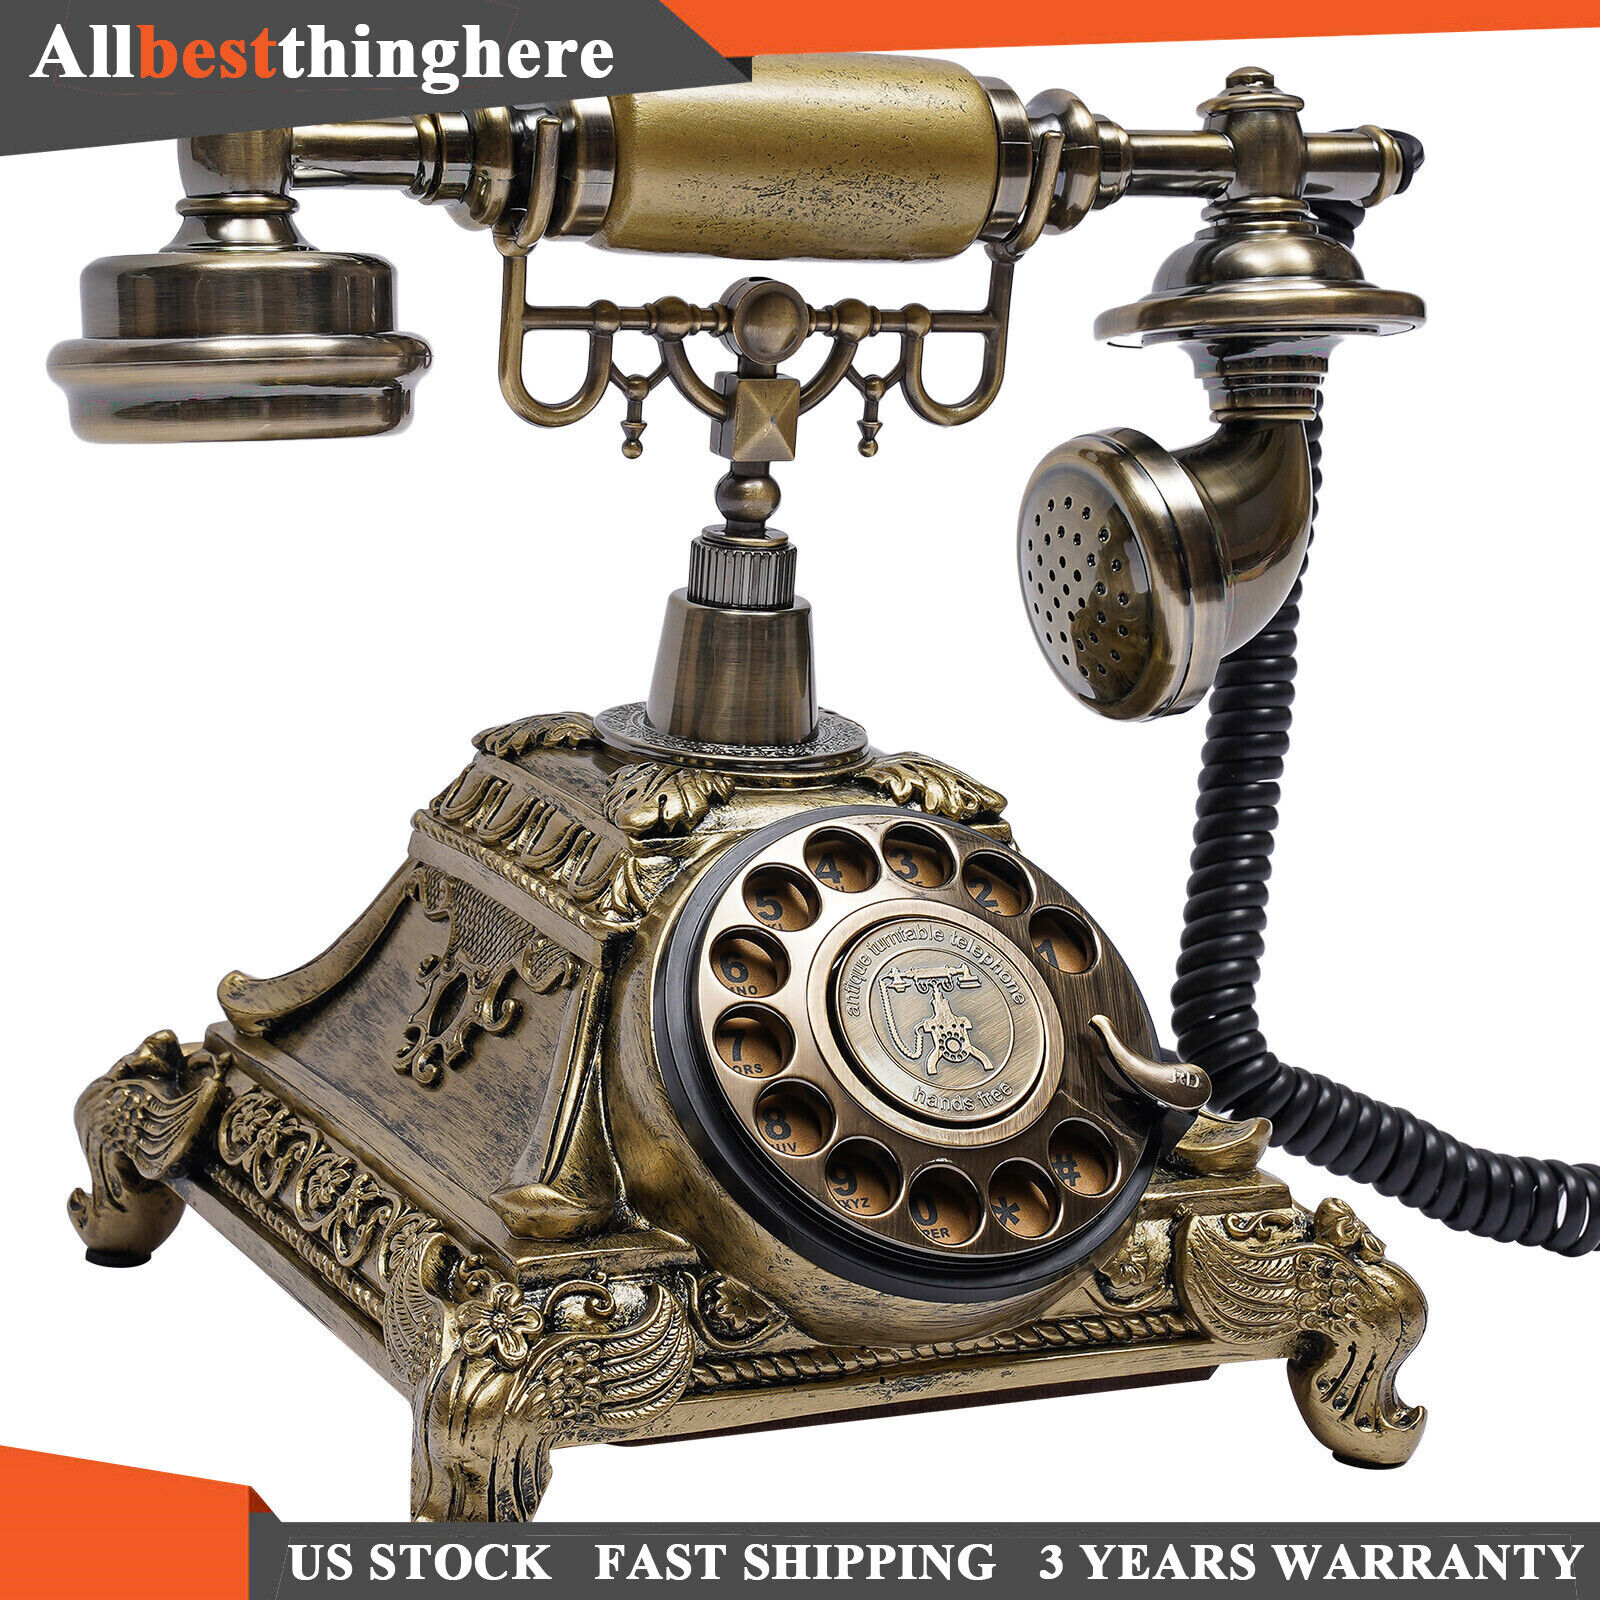 Vintage Handset Telephone Antique Old Fashioned Rotary Dial Phone Home Decor USA